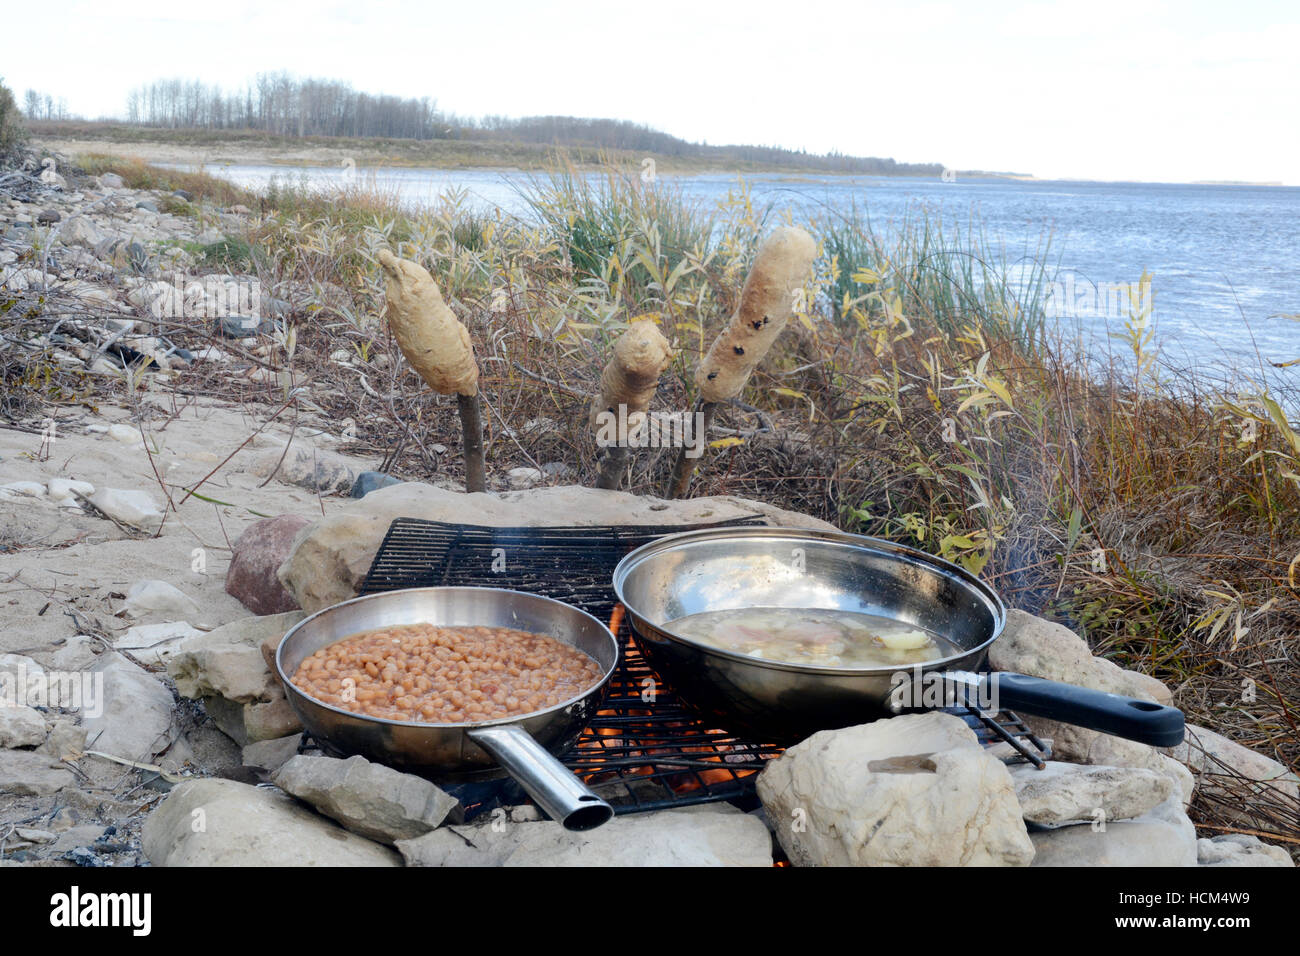 Bannock on a stick, a native North American food similar to bread, cooked on a campfire in Northern Ontario, Canada. Stock Photo